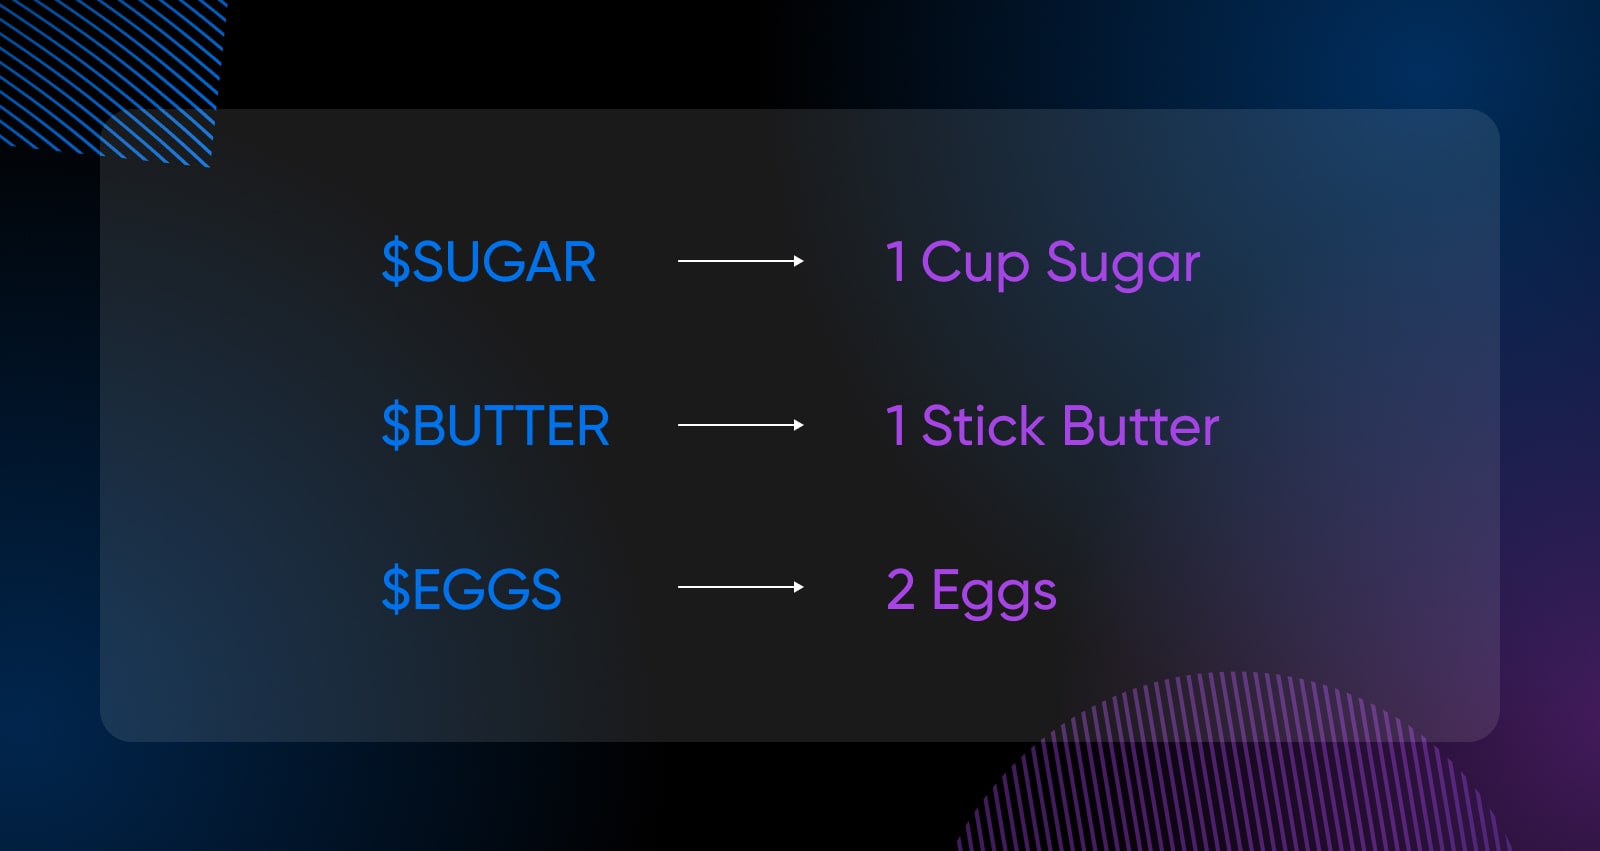 example of environment variables showing an example of a dynamic value like $SUGAR and what that valuable equals: 1 cup sugar